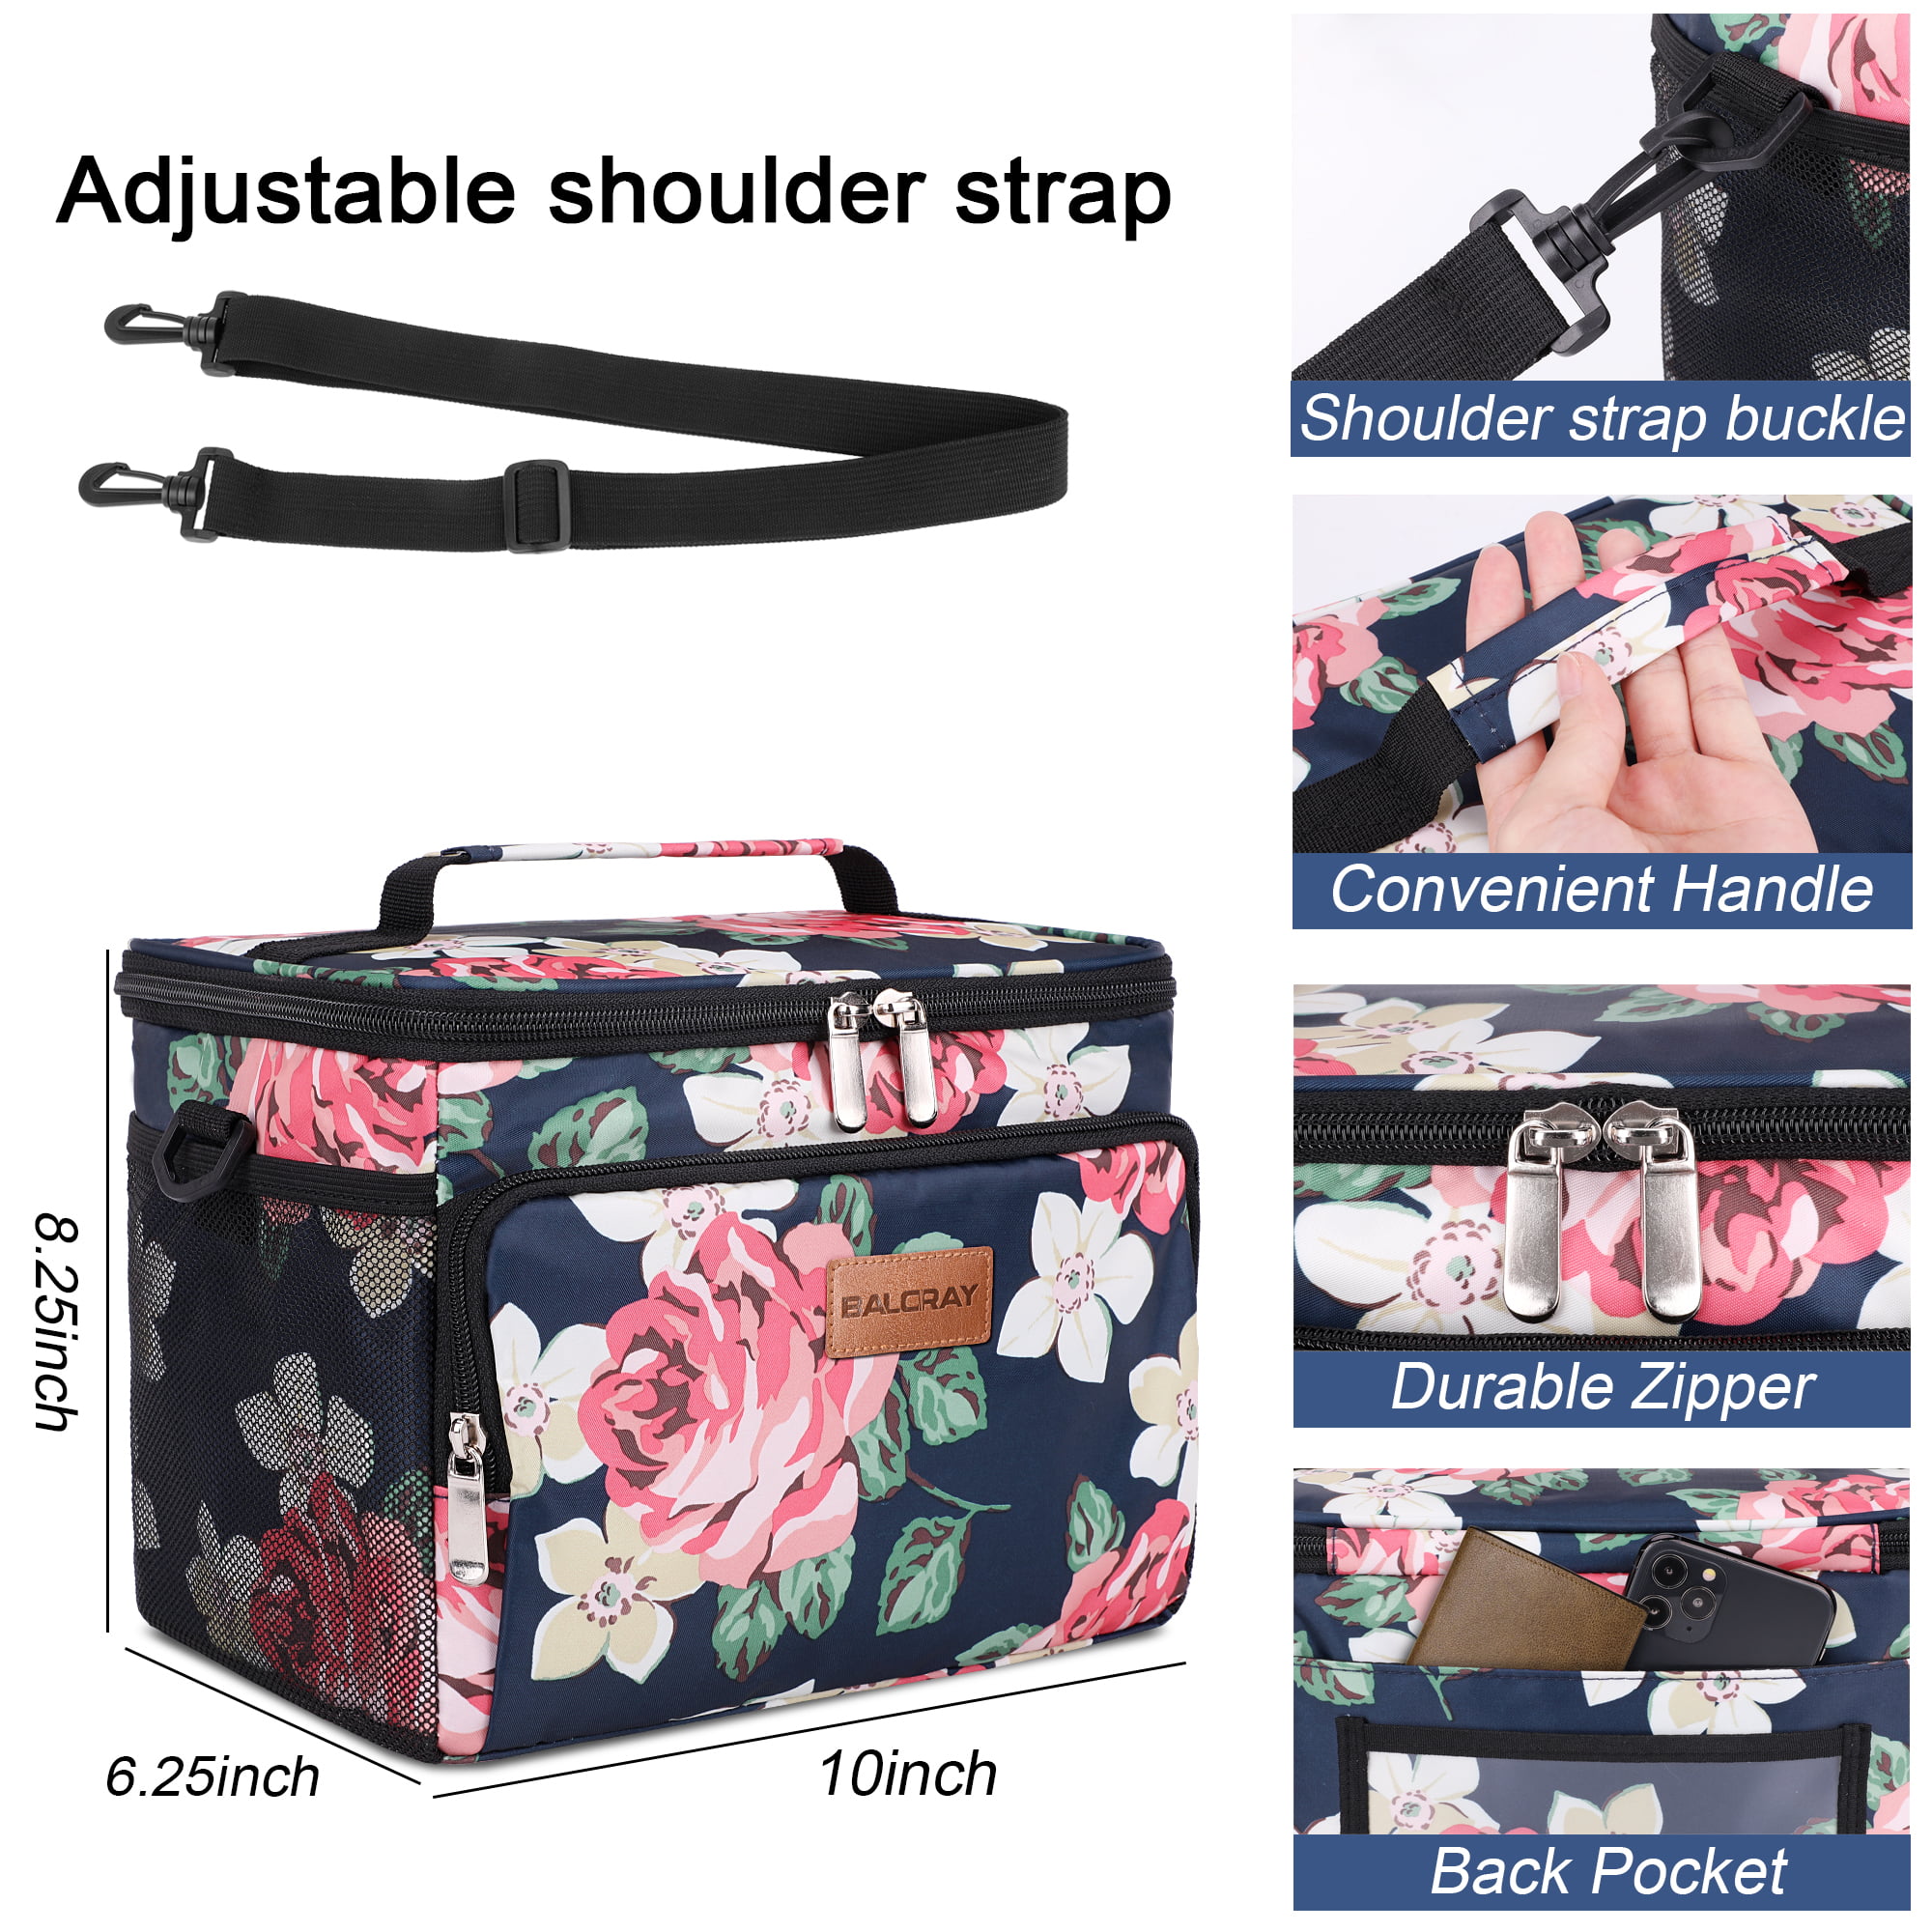  VLM Lunch Bags for Women,Leakproof Insulated Floral Lunch Box  with Adjustable Shoulder Strap Reusable Zipper Cooler Tote Bag for  Work,Picnic,Camping: Home & Kitchen